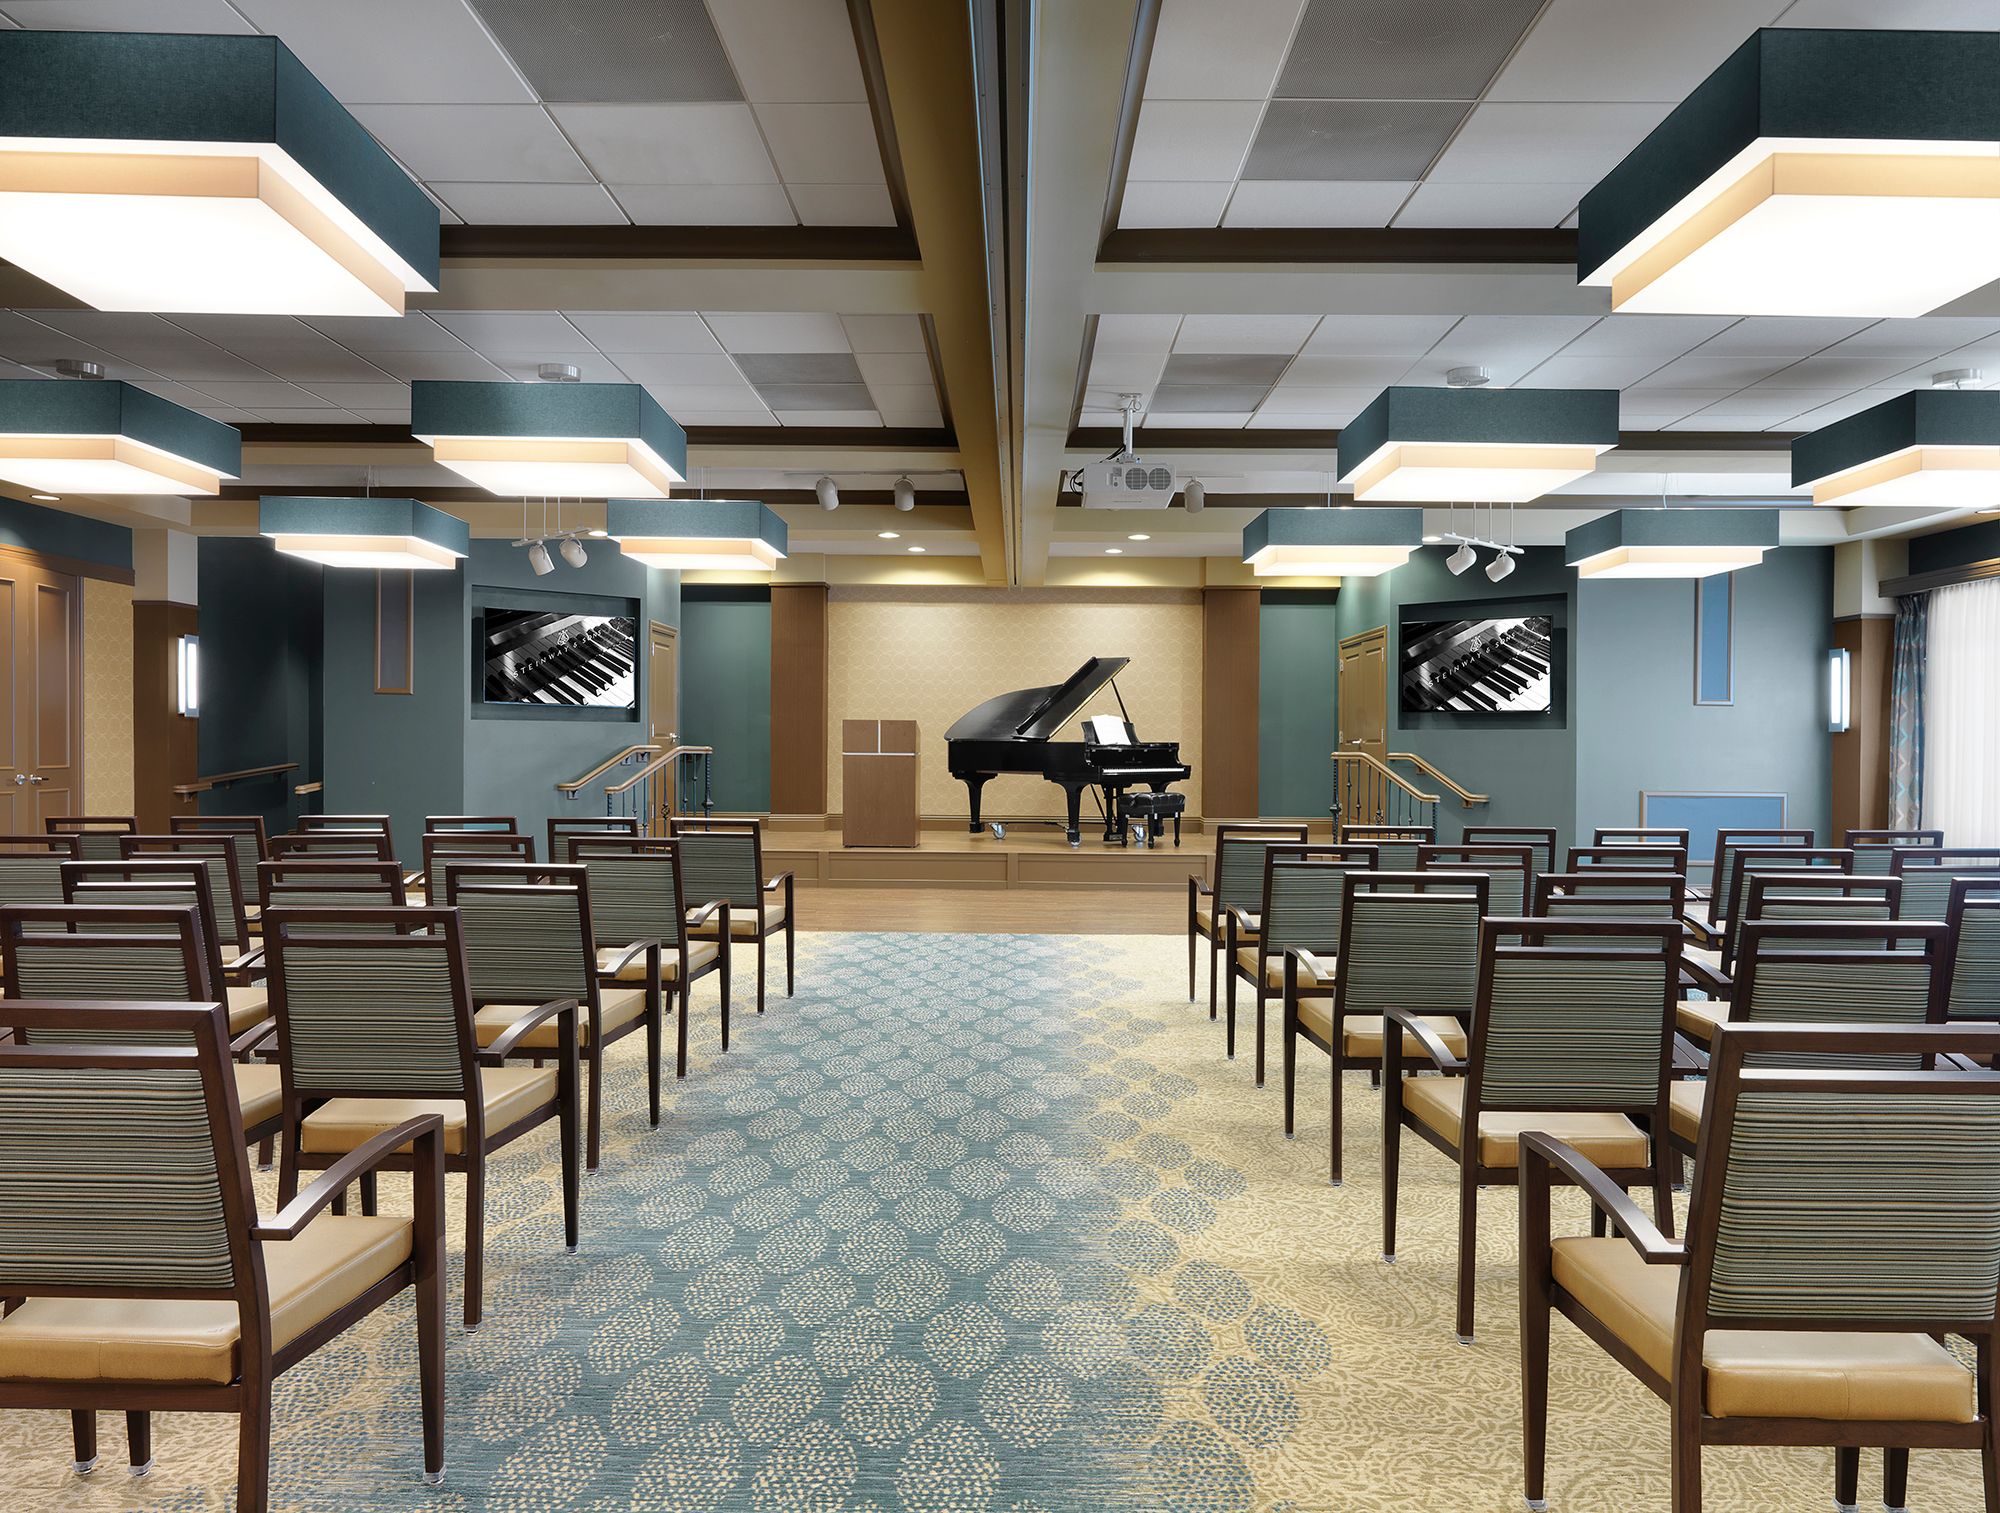 Senior living community Kingswood's foyer with piano, chairs, and classroom architecture.